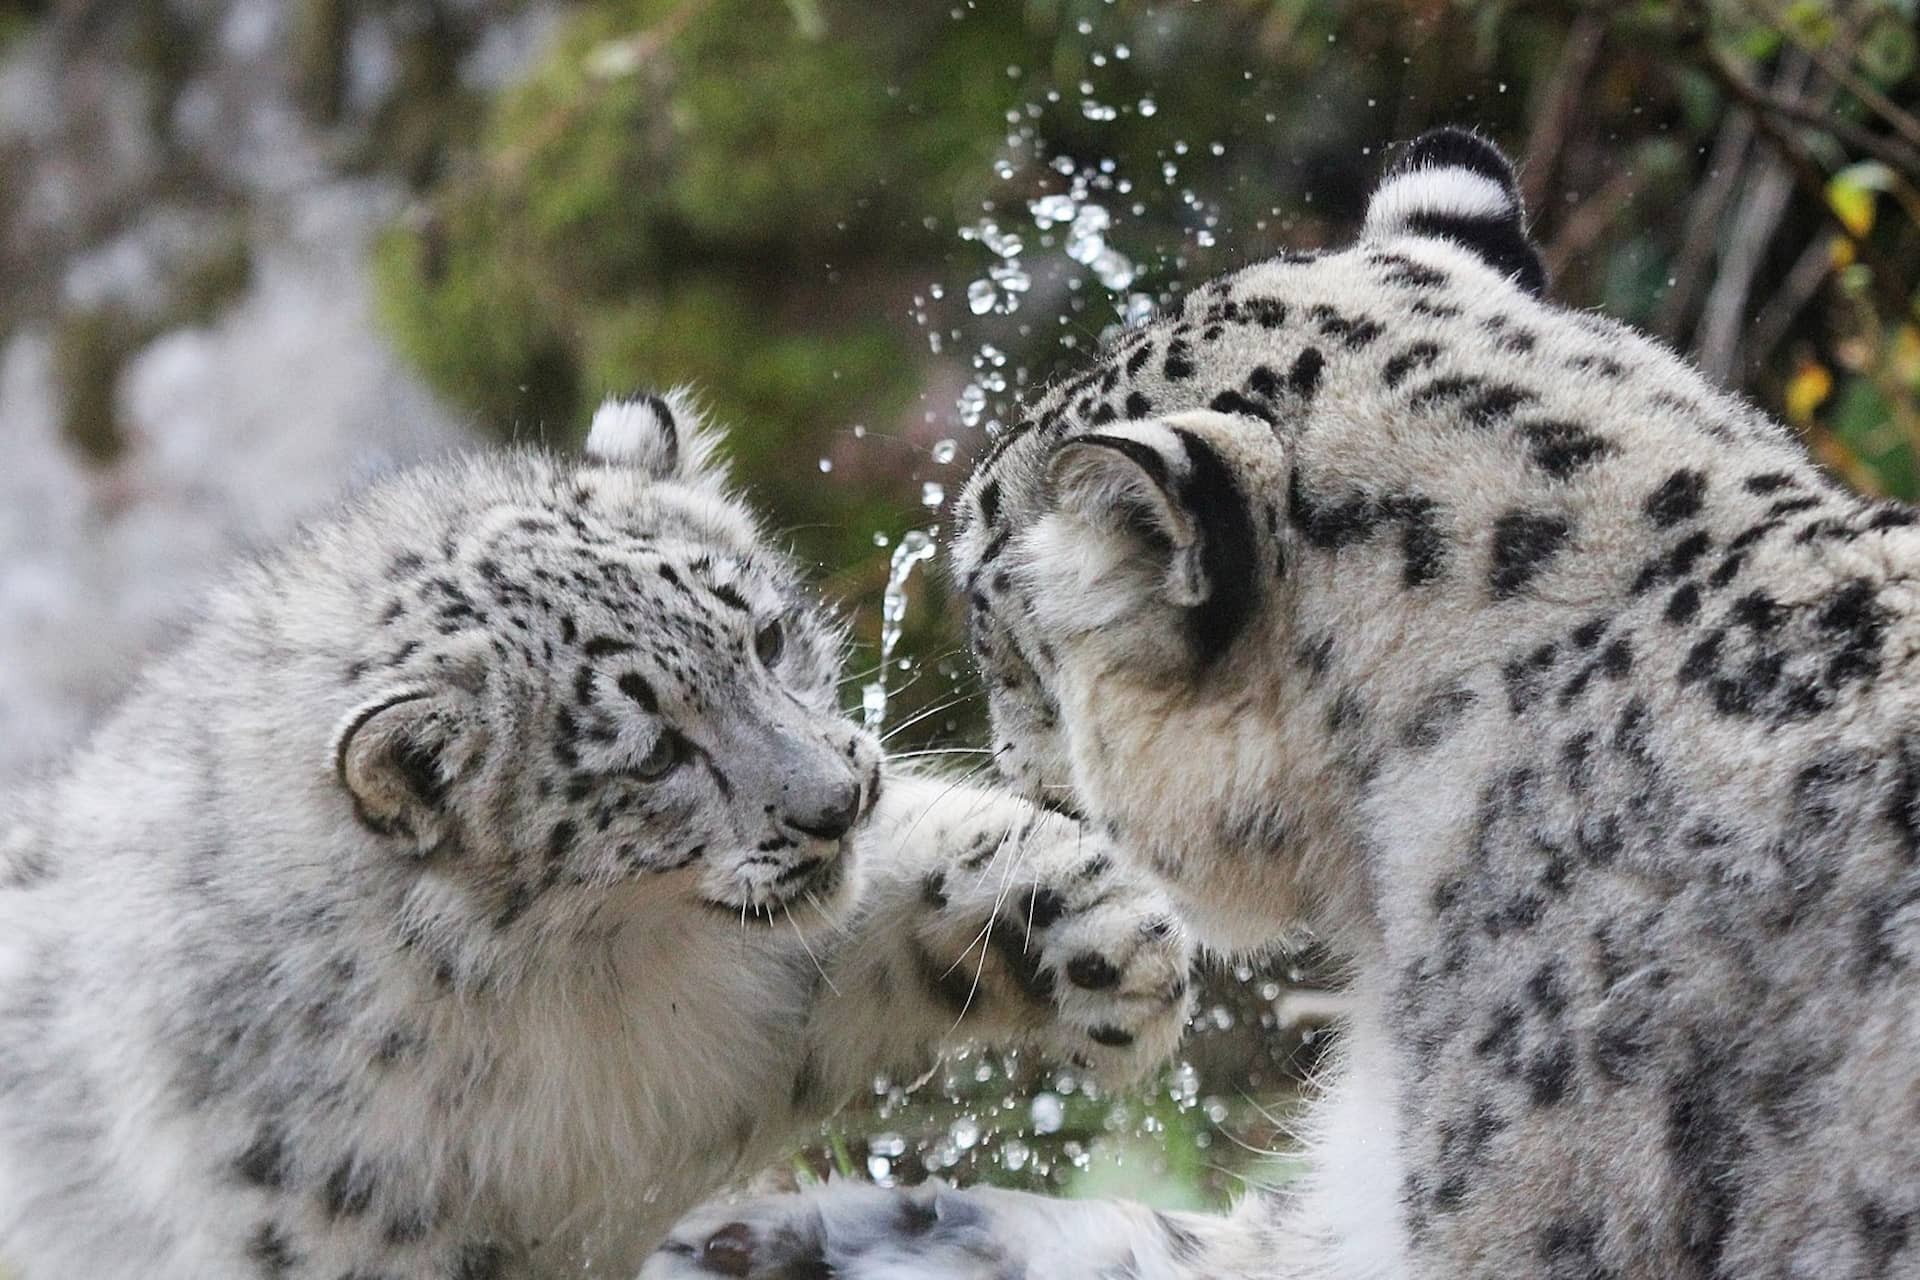 Snow leopard cub and mum playing in water. Cub is playfully pawing and splashing at mum. IMAGE: Amy Middleton 2023